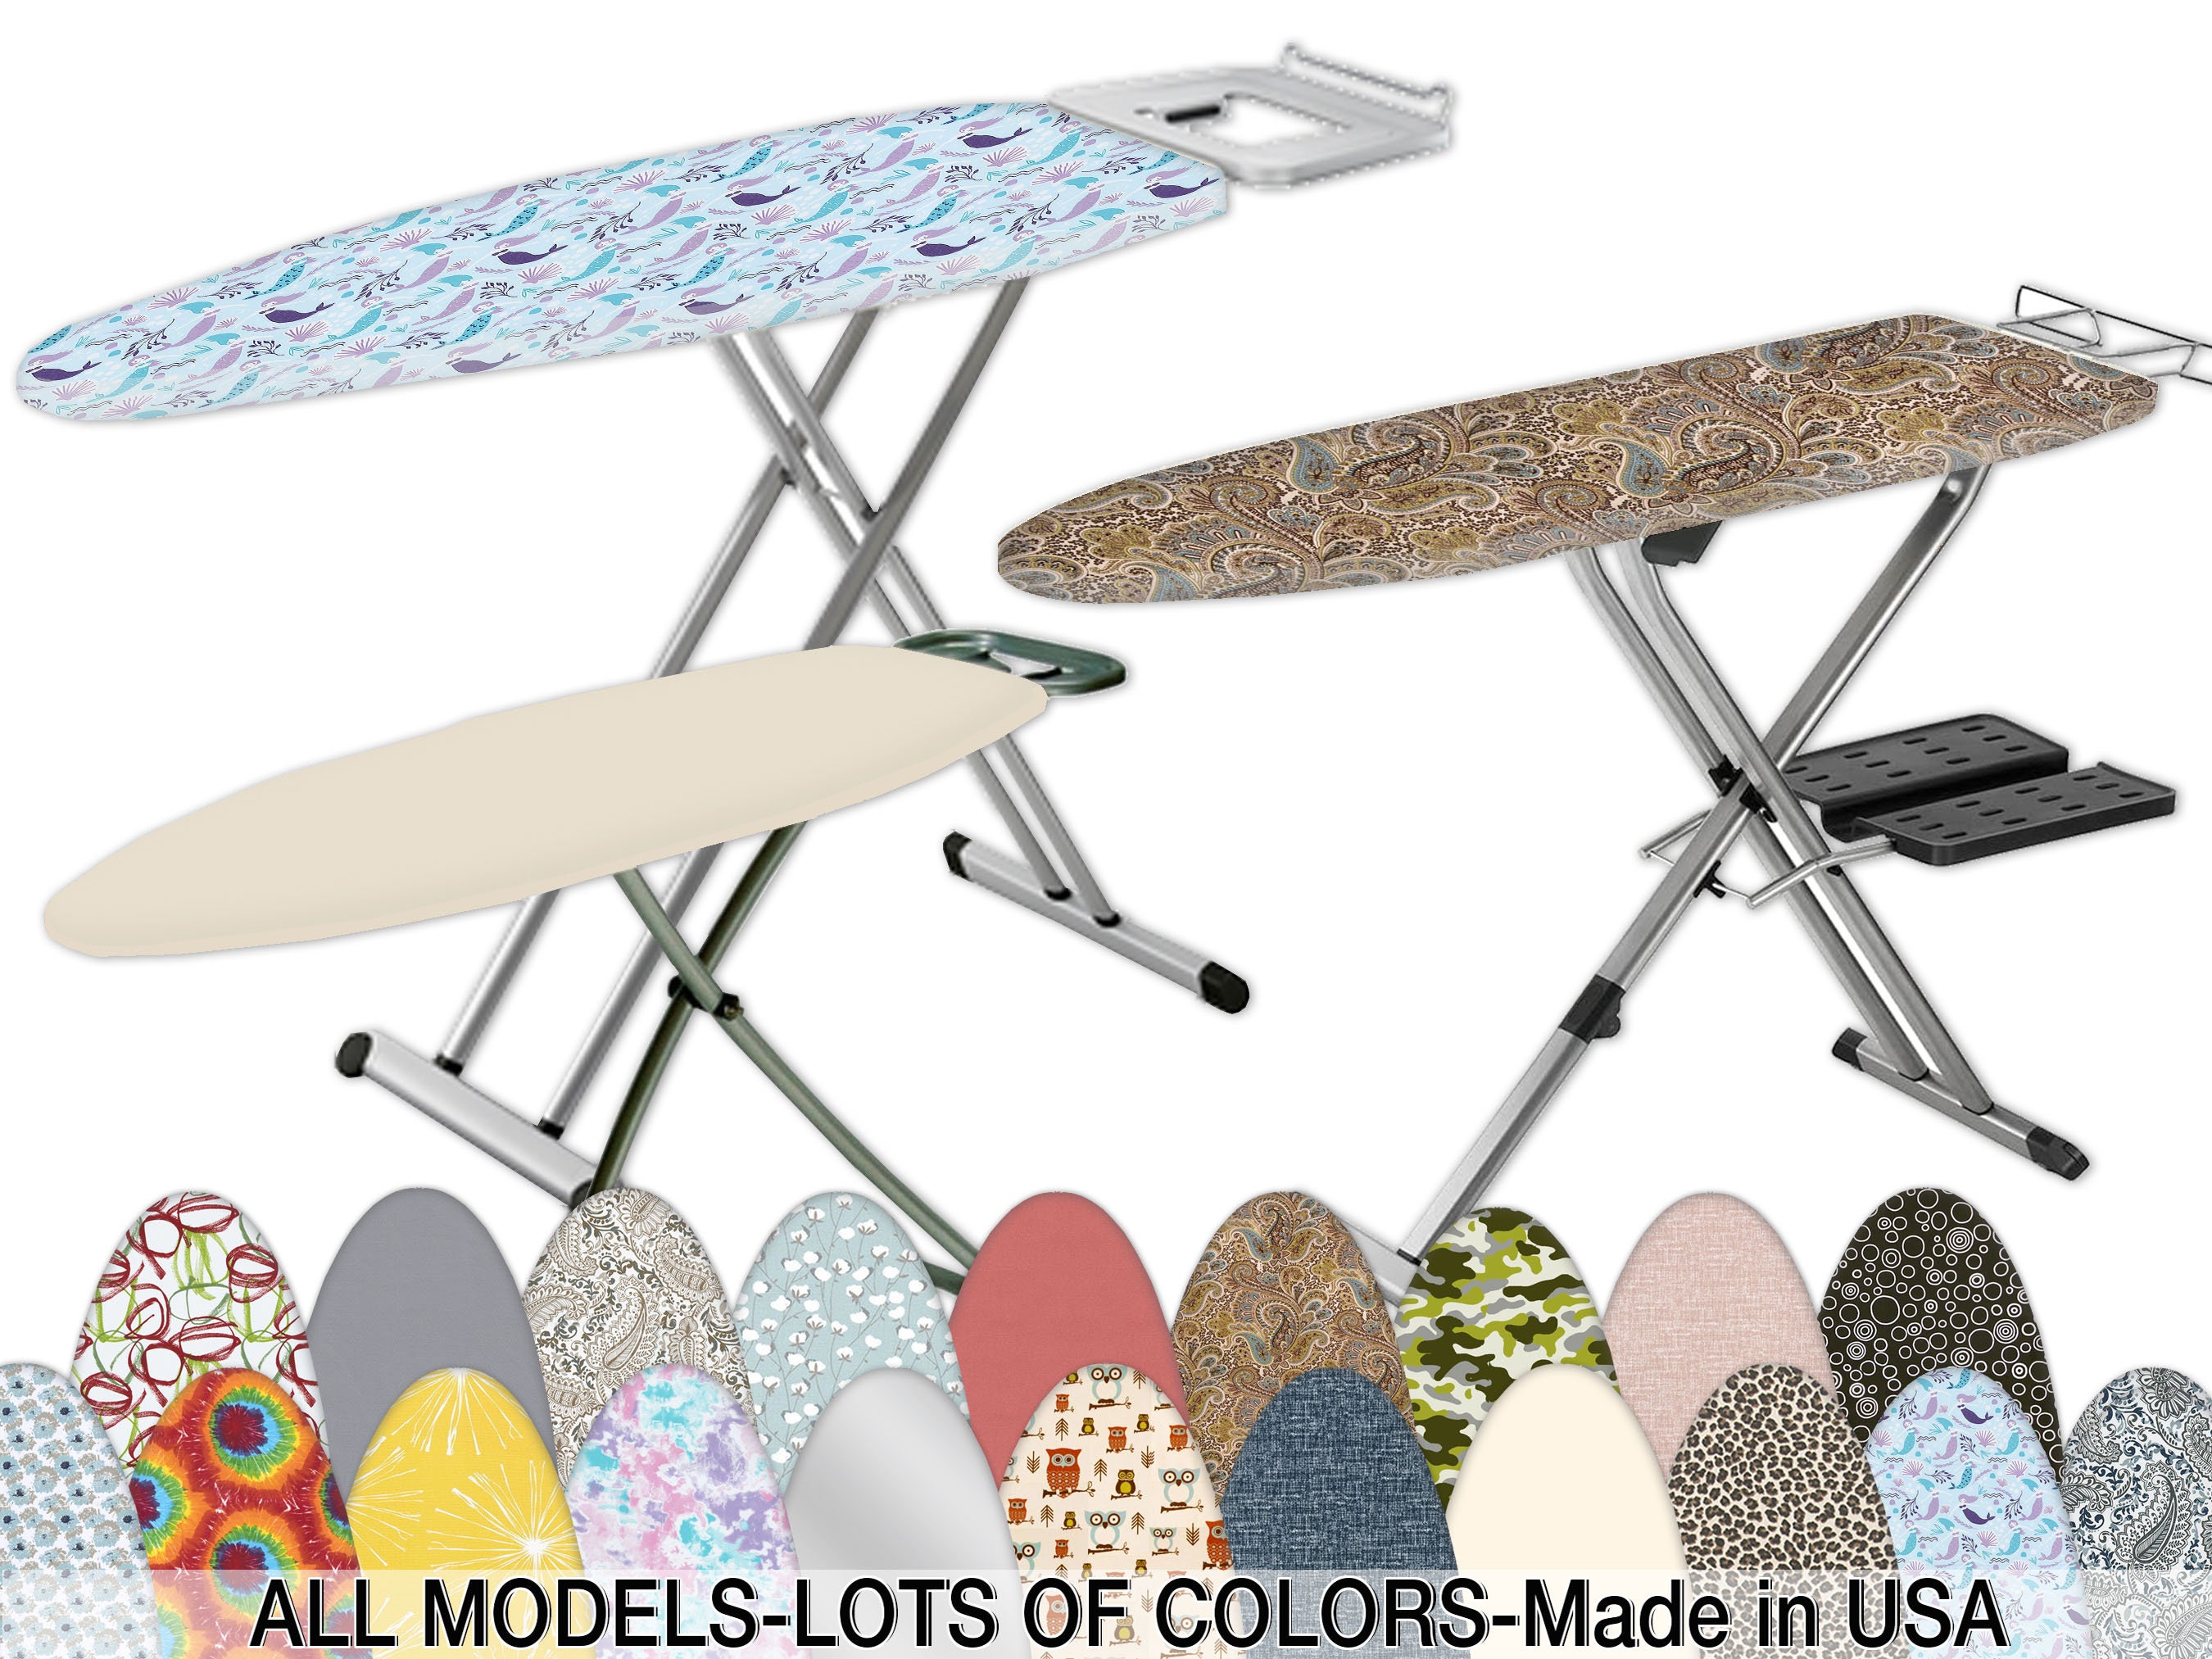 Combination Ironing Board Cover and 100 Percent WOOL IRONING PAD